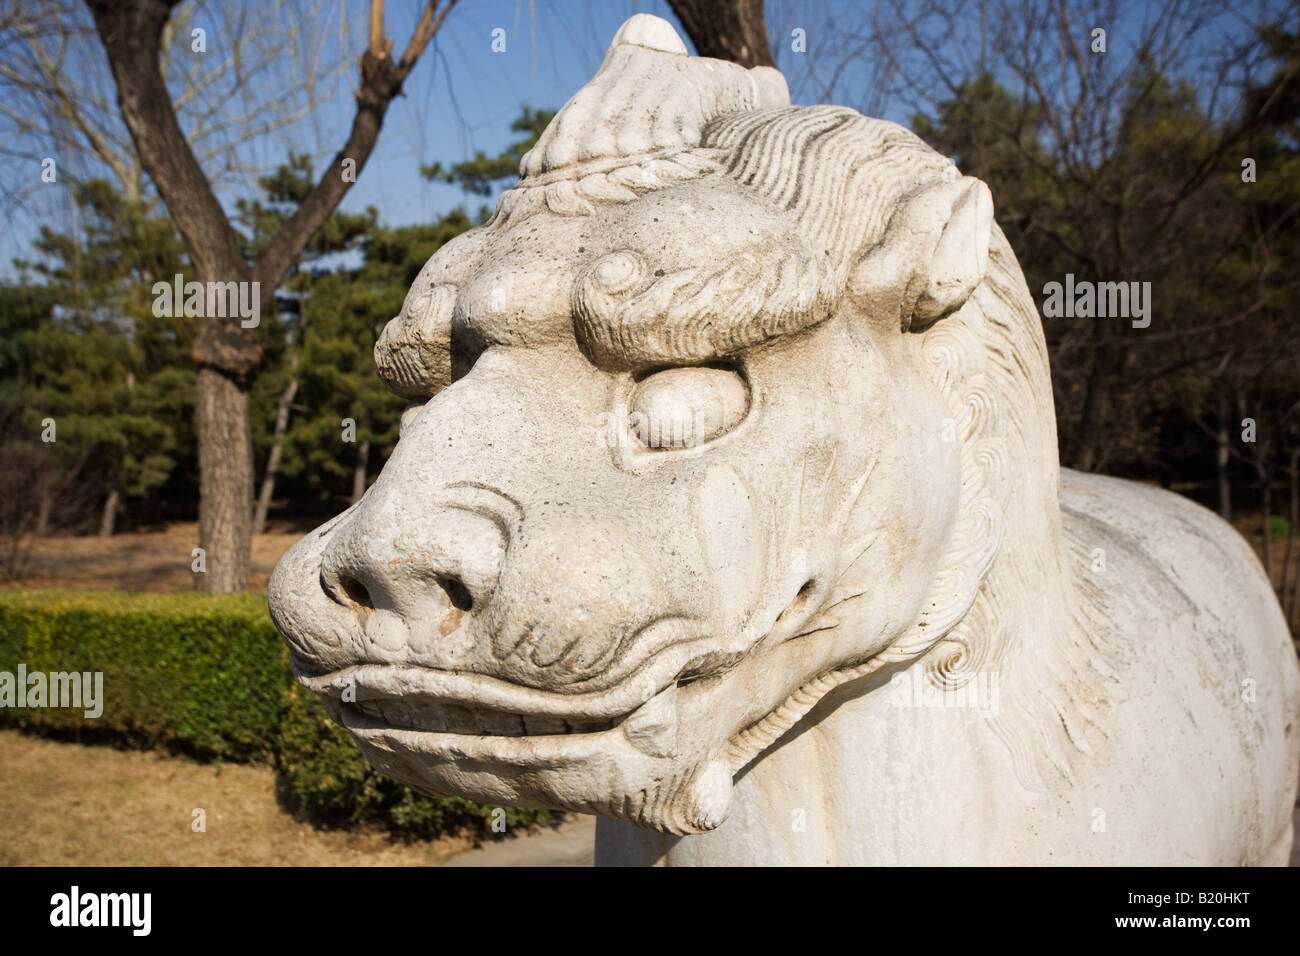 Statue of a standing Xiezi mythical Chinese Unicorn on Spirit Way at the Ming Tombs site Beijing China Stock Photo